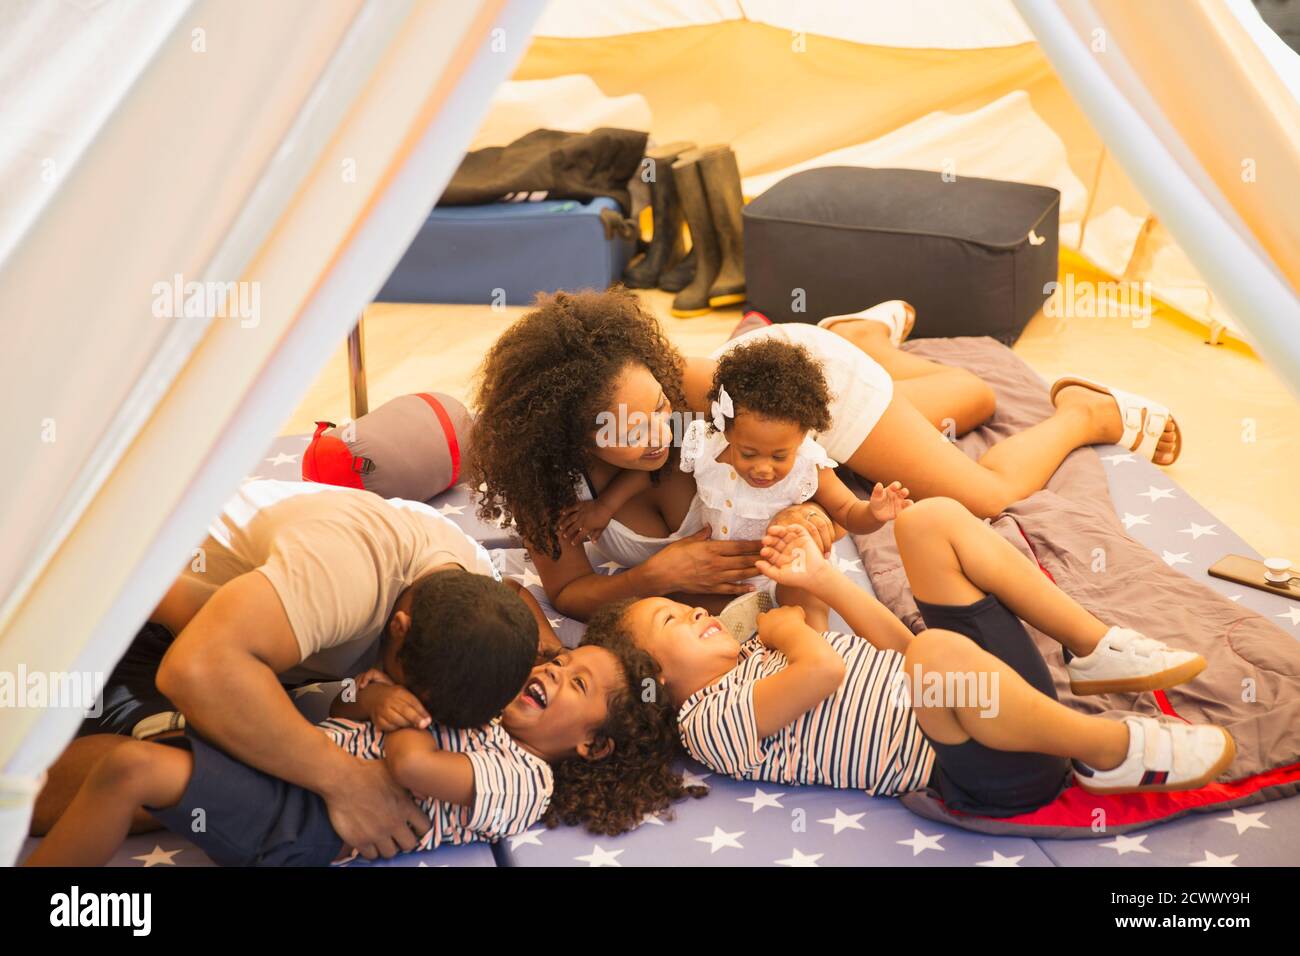 Playful family tickling and laughing inside tent Stock Photo